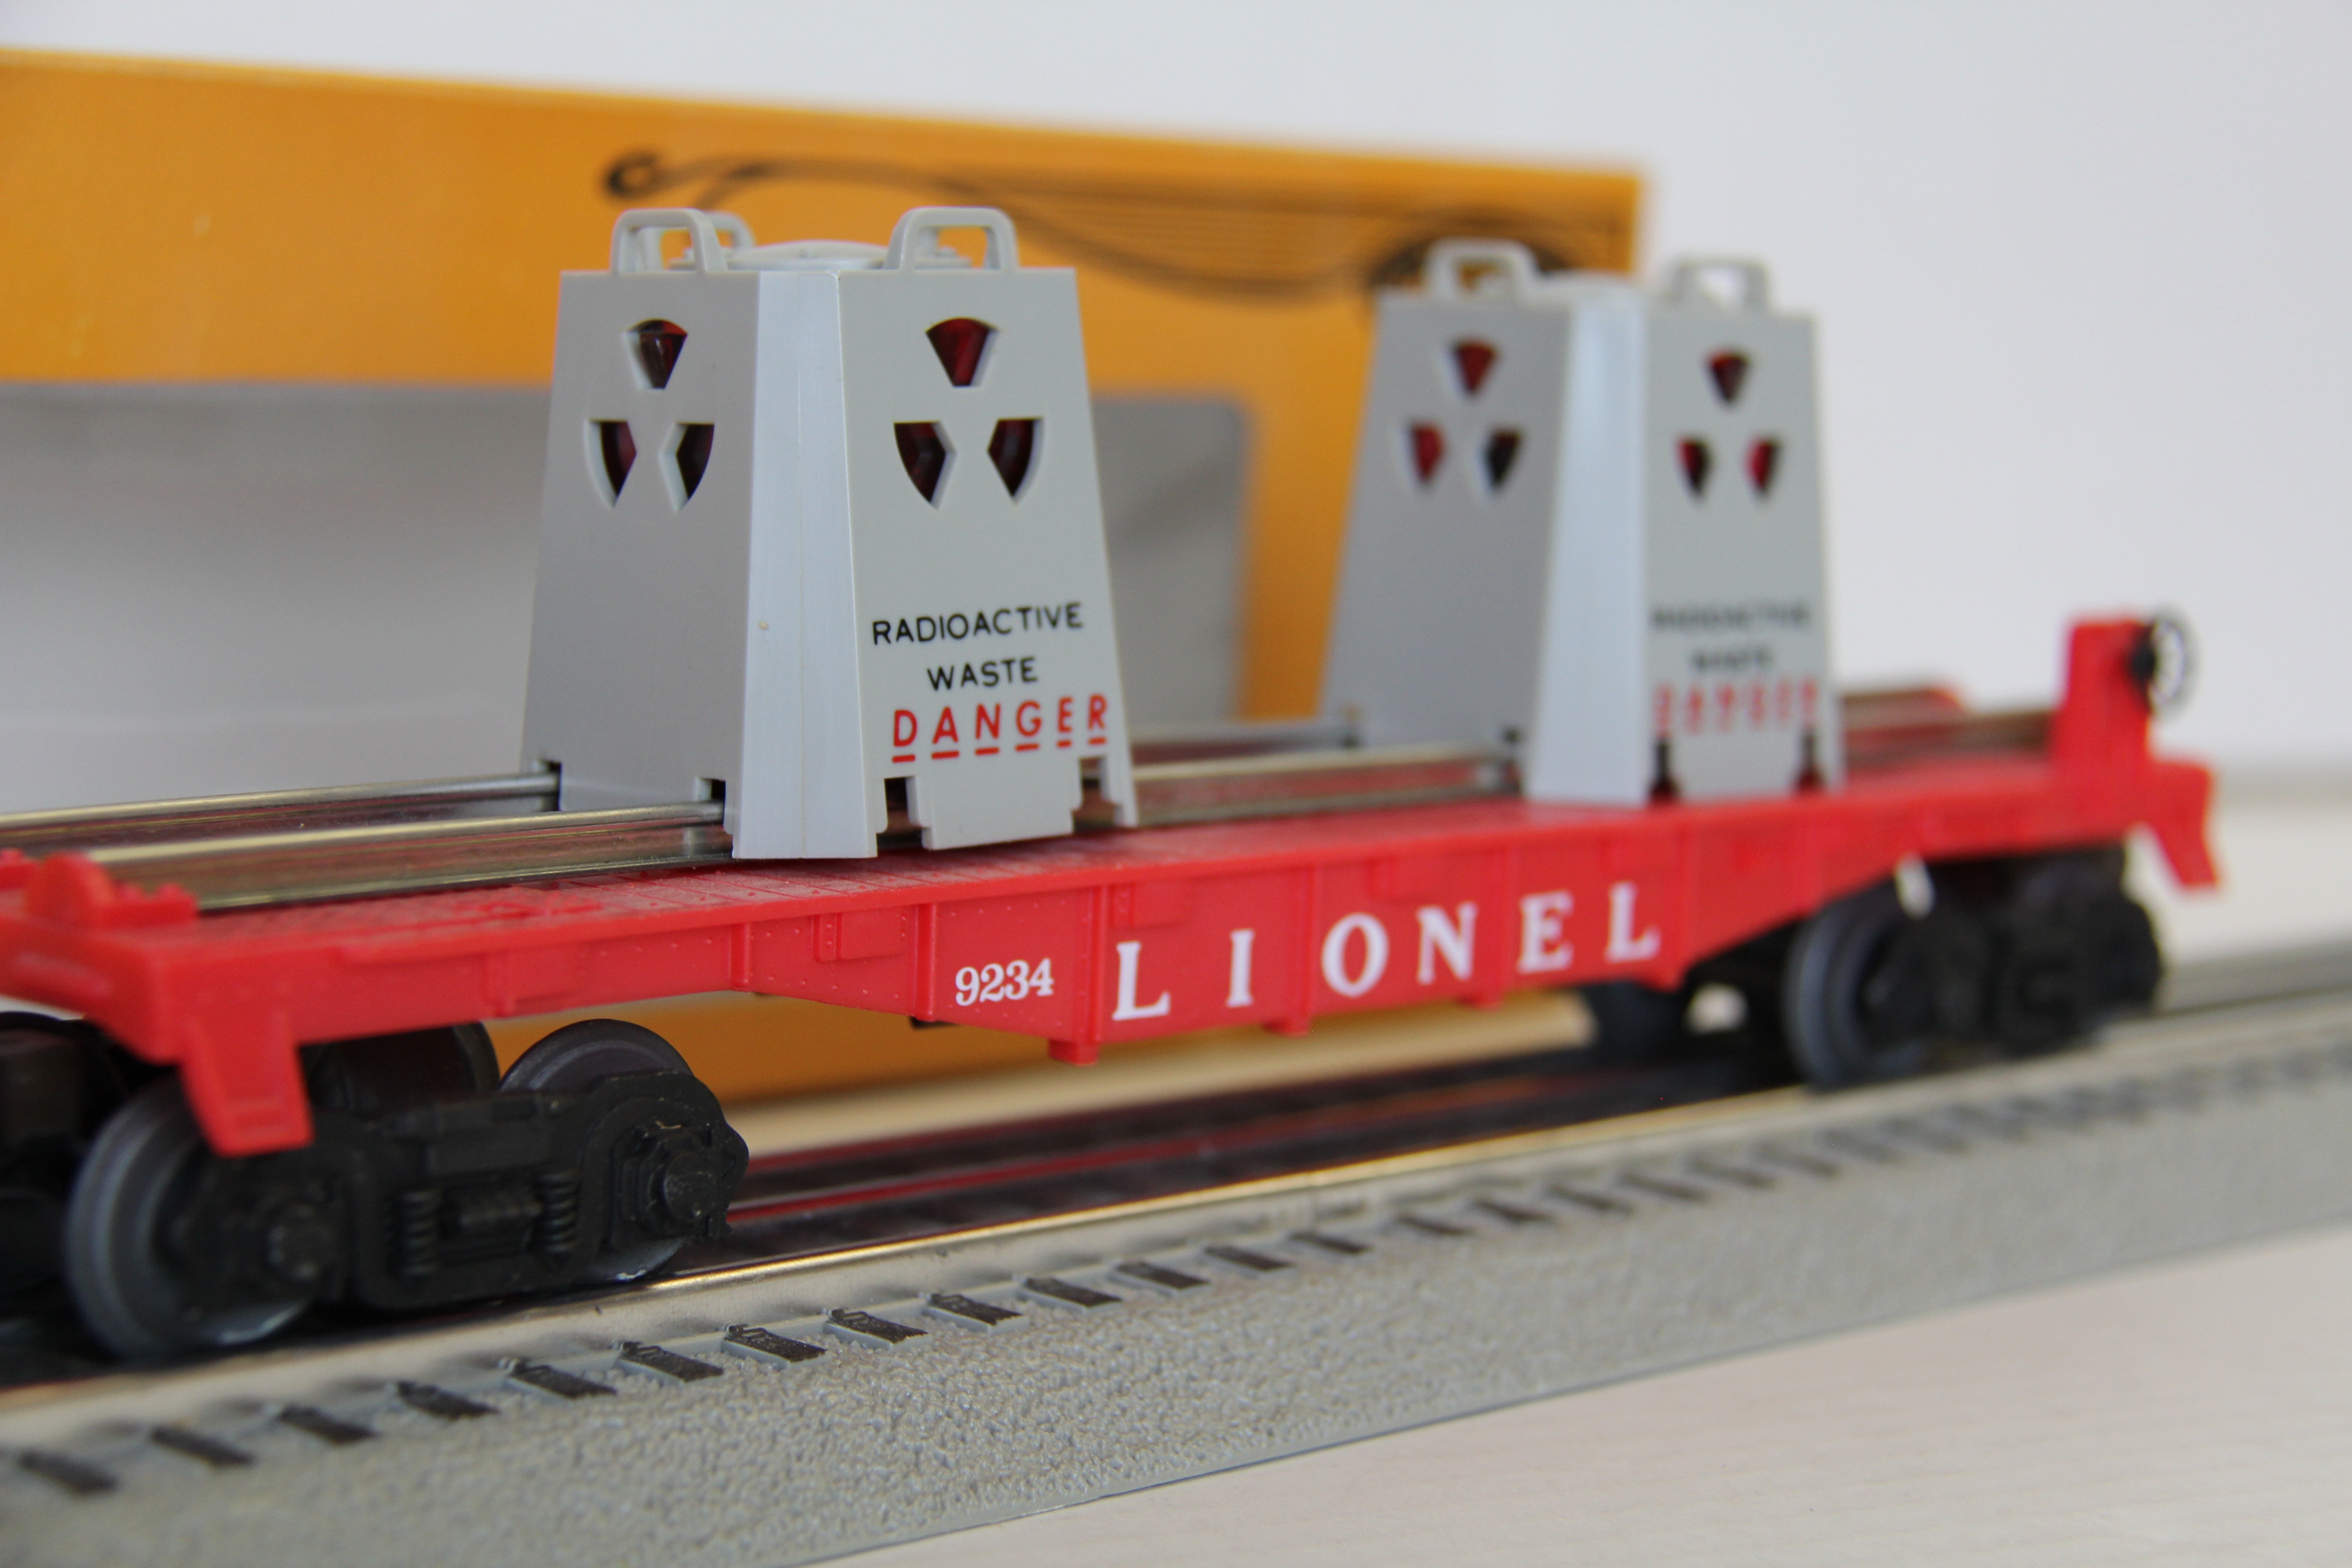 Lionel 6-9234 Radioactive -Waste Car with Waste Containers-Second hand-M4497